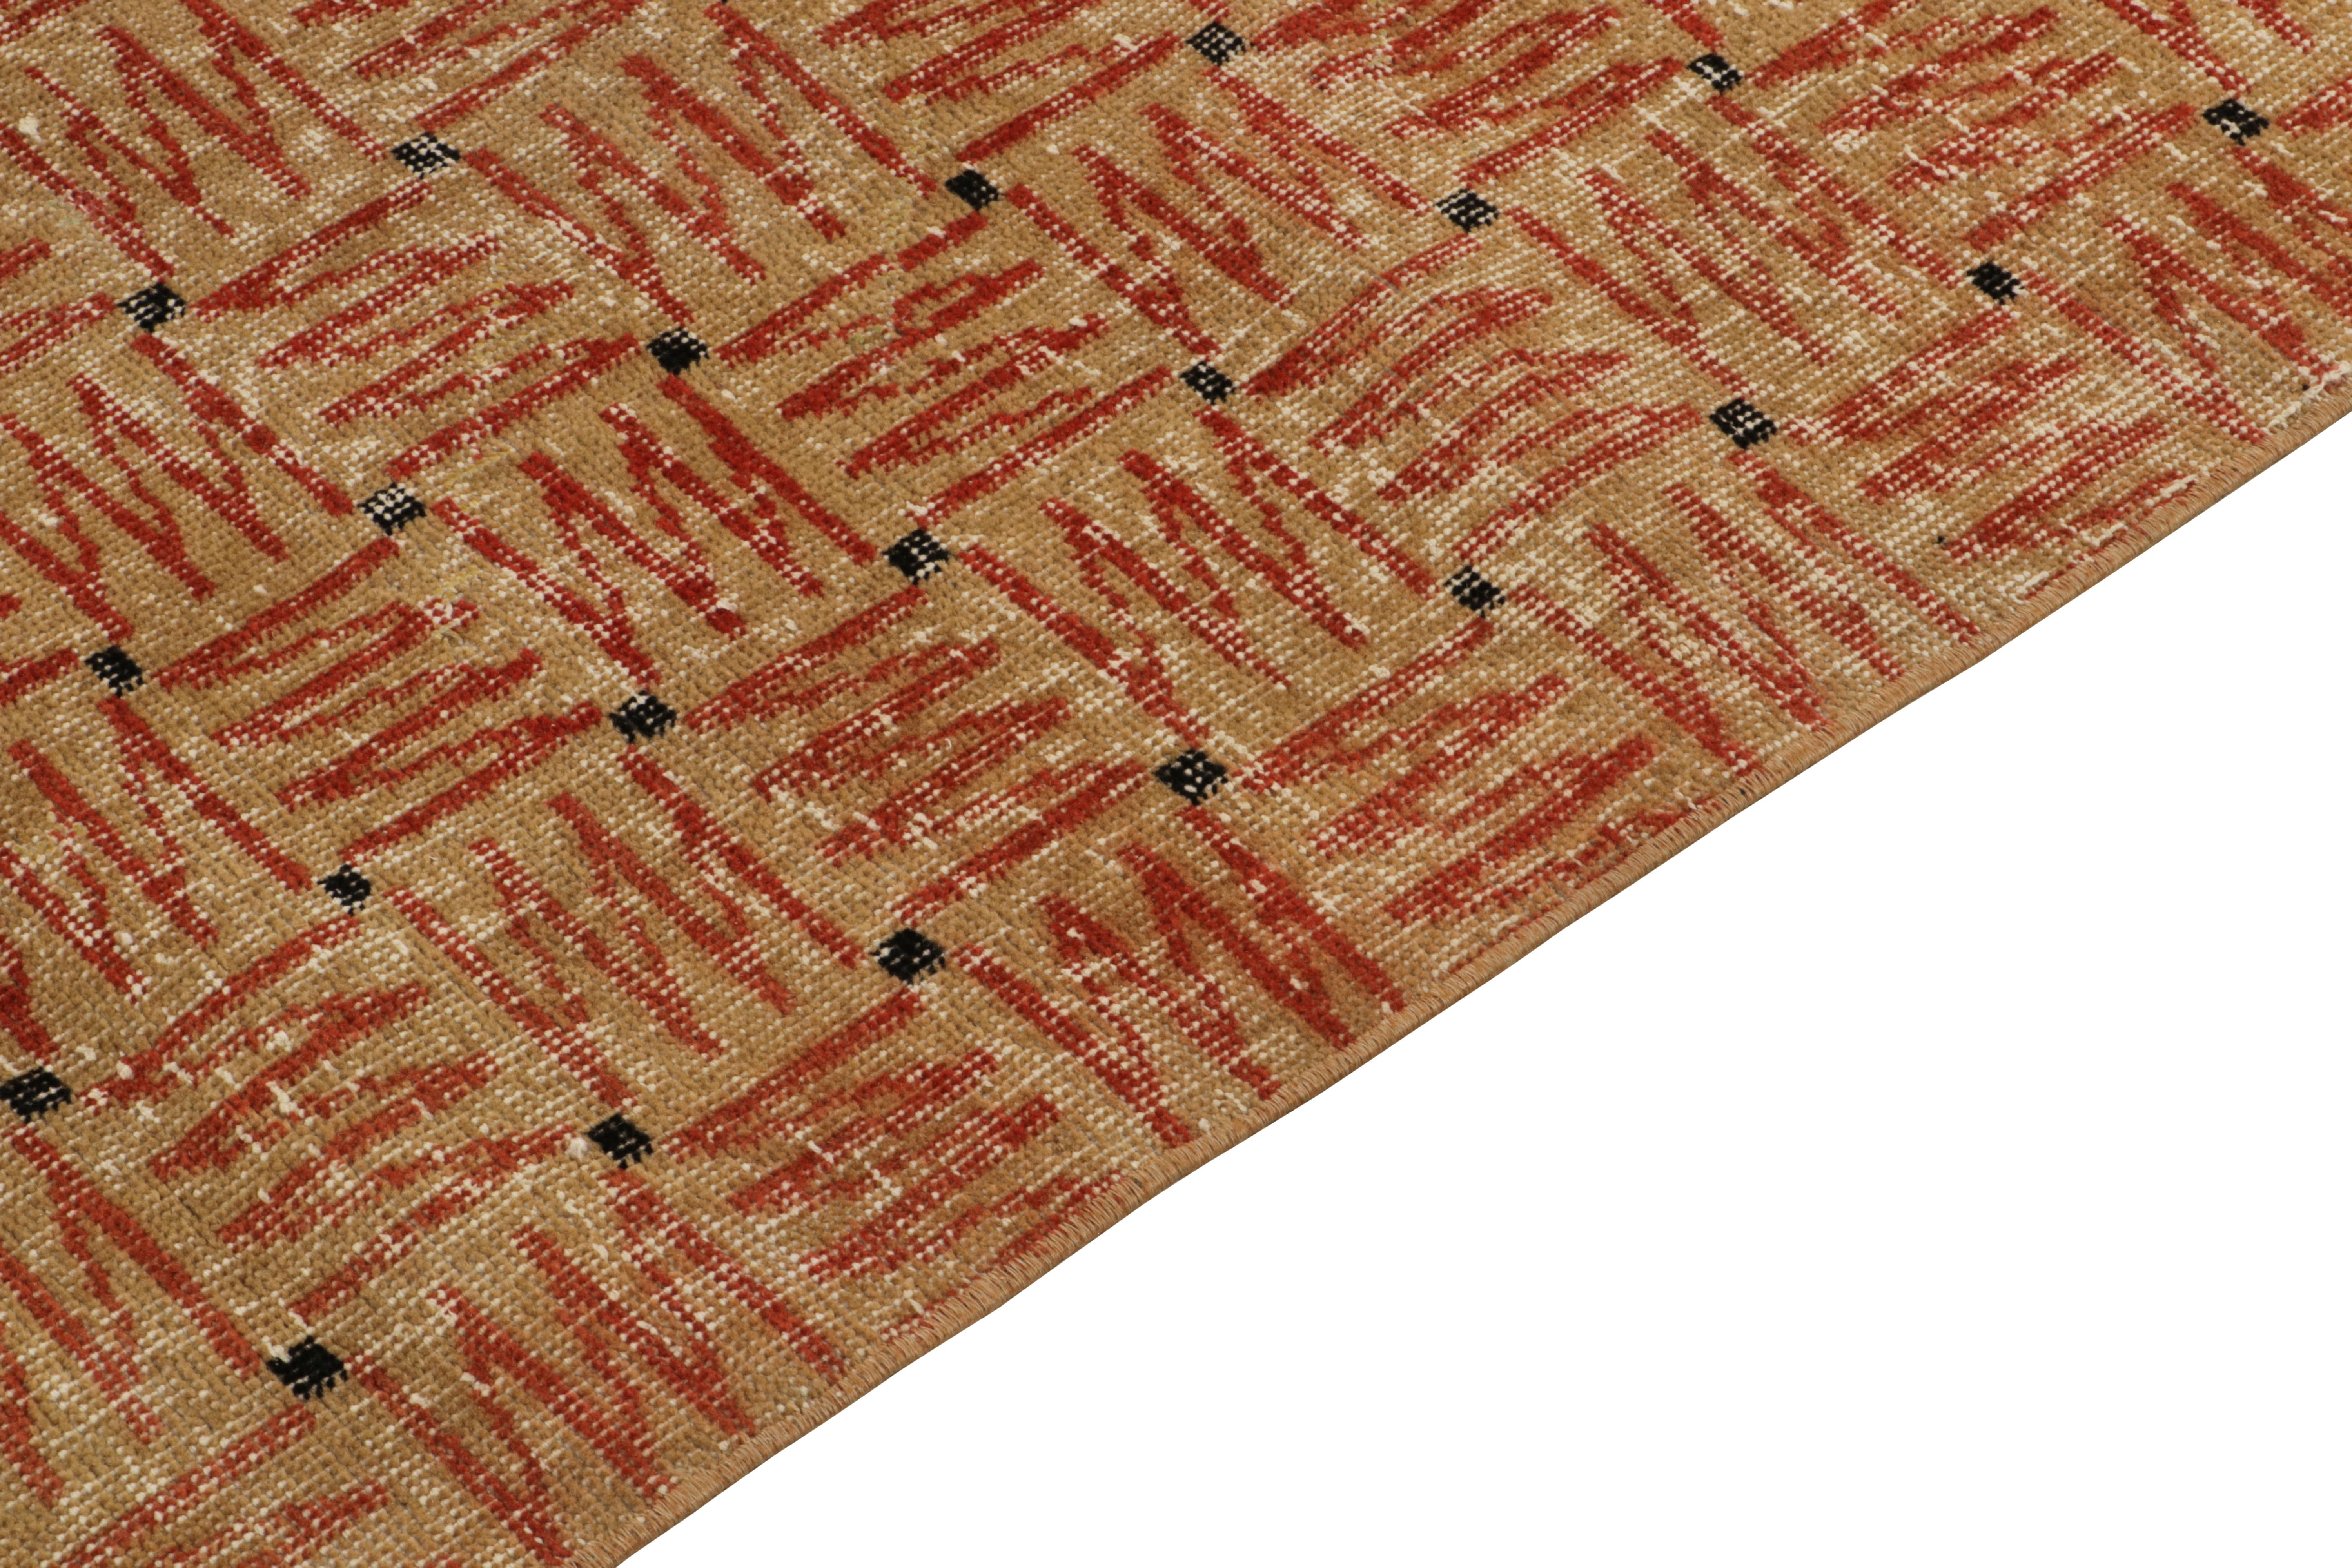 Hand-Knotted 1960s Vintage Deco Rug in Beige-Brown and Red Geometric Patterns, by Rug & Kilim For Sale